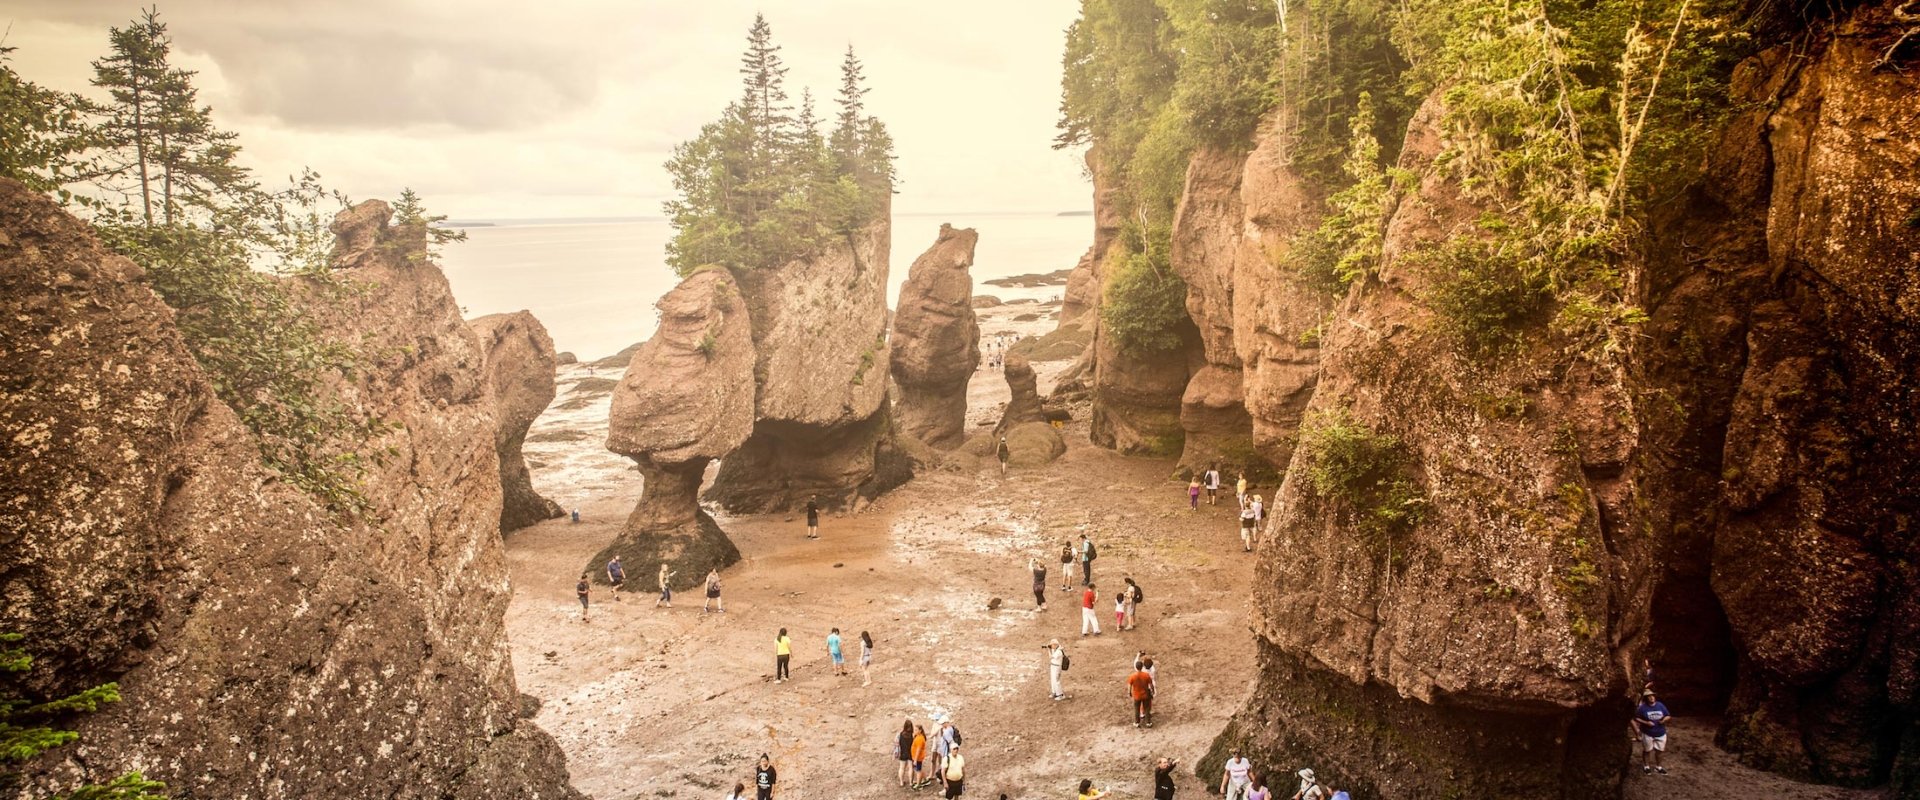 Visitors explore the low tide in the Bay of Fundy